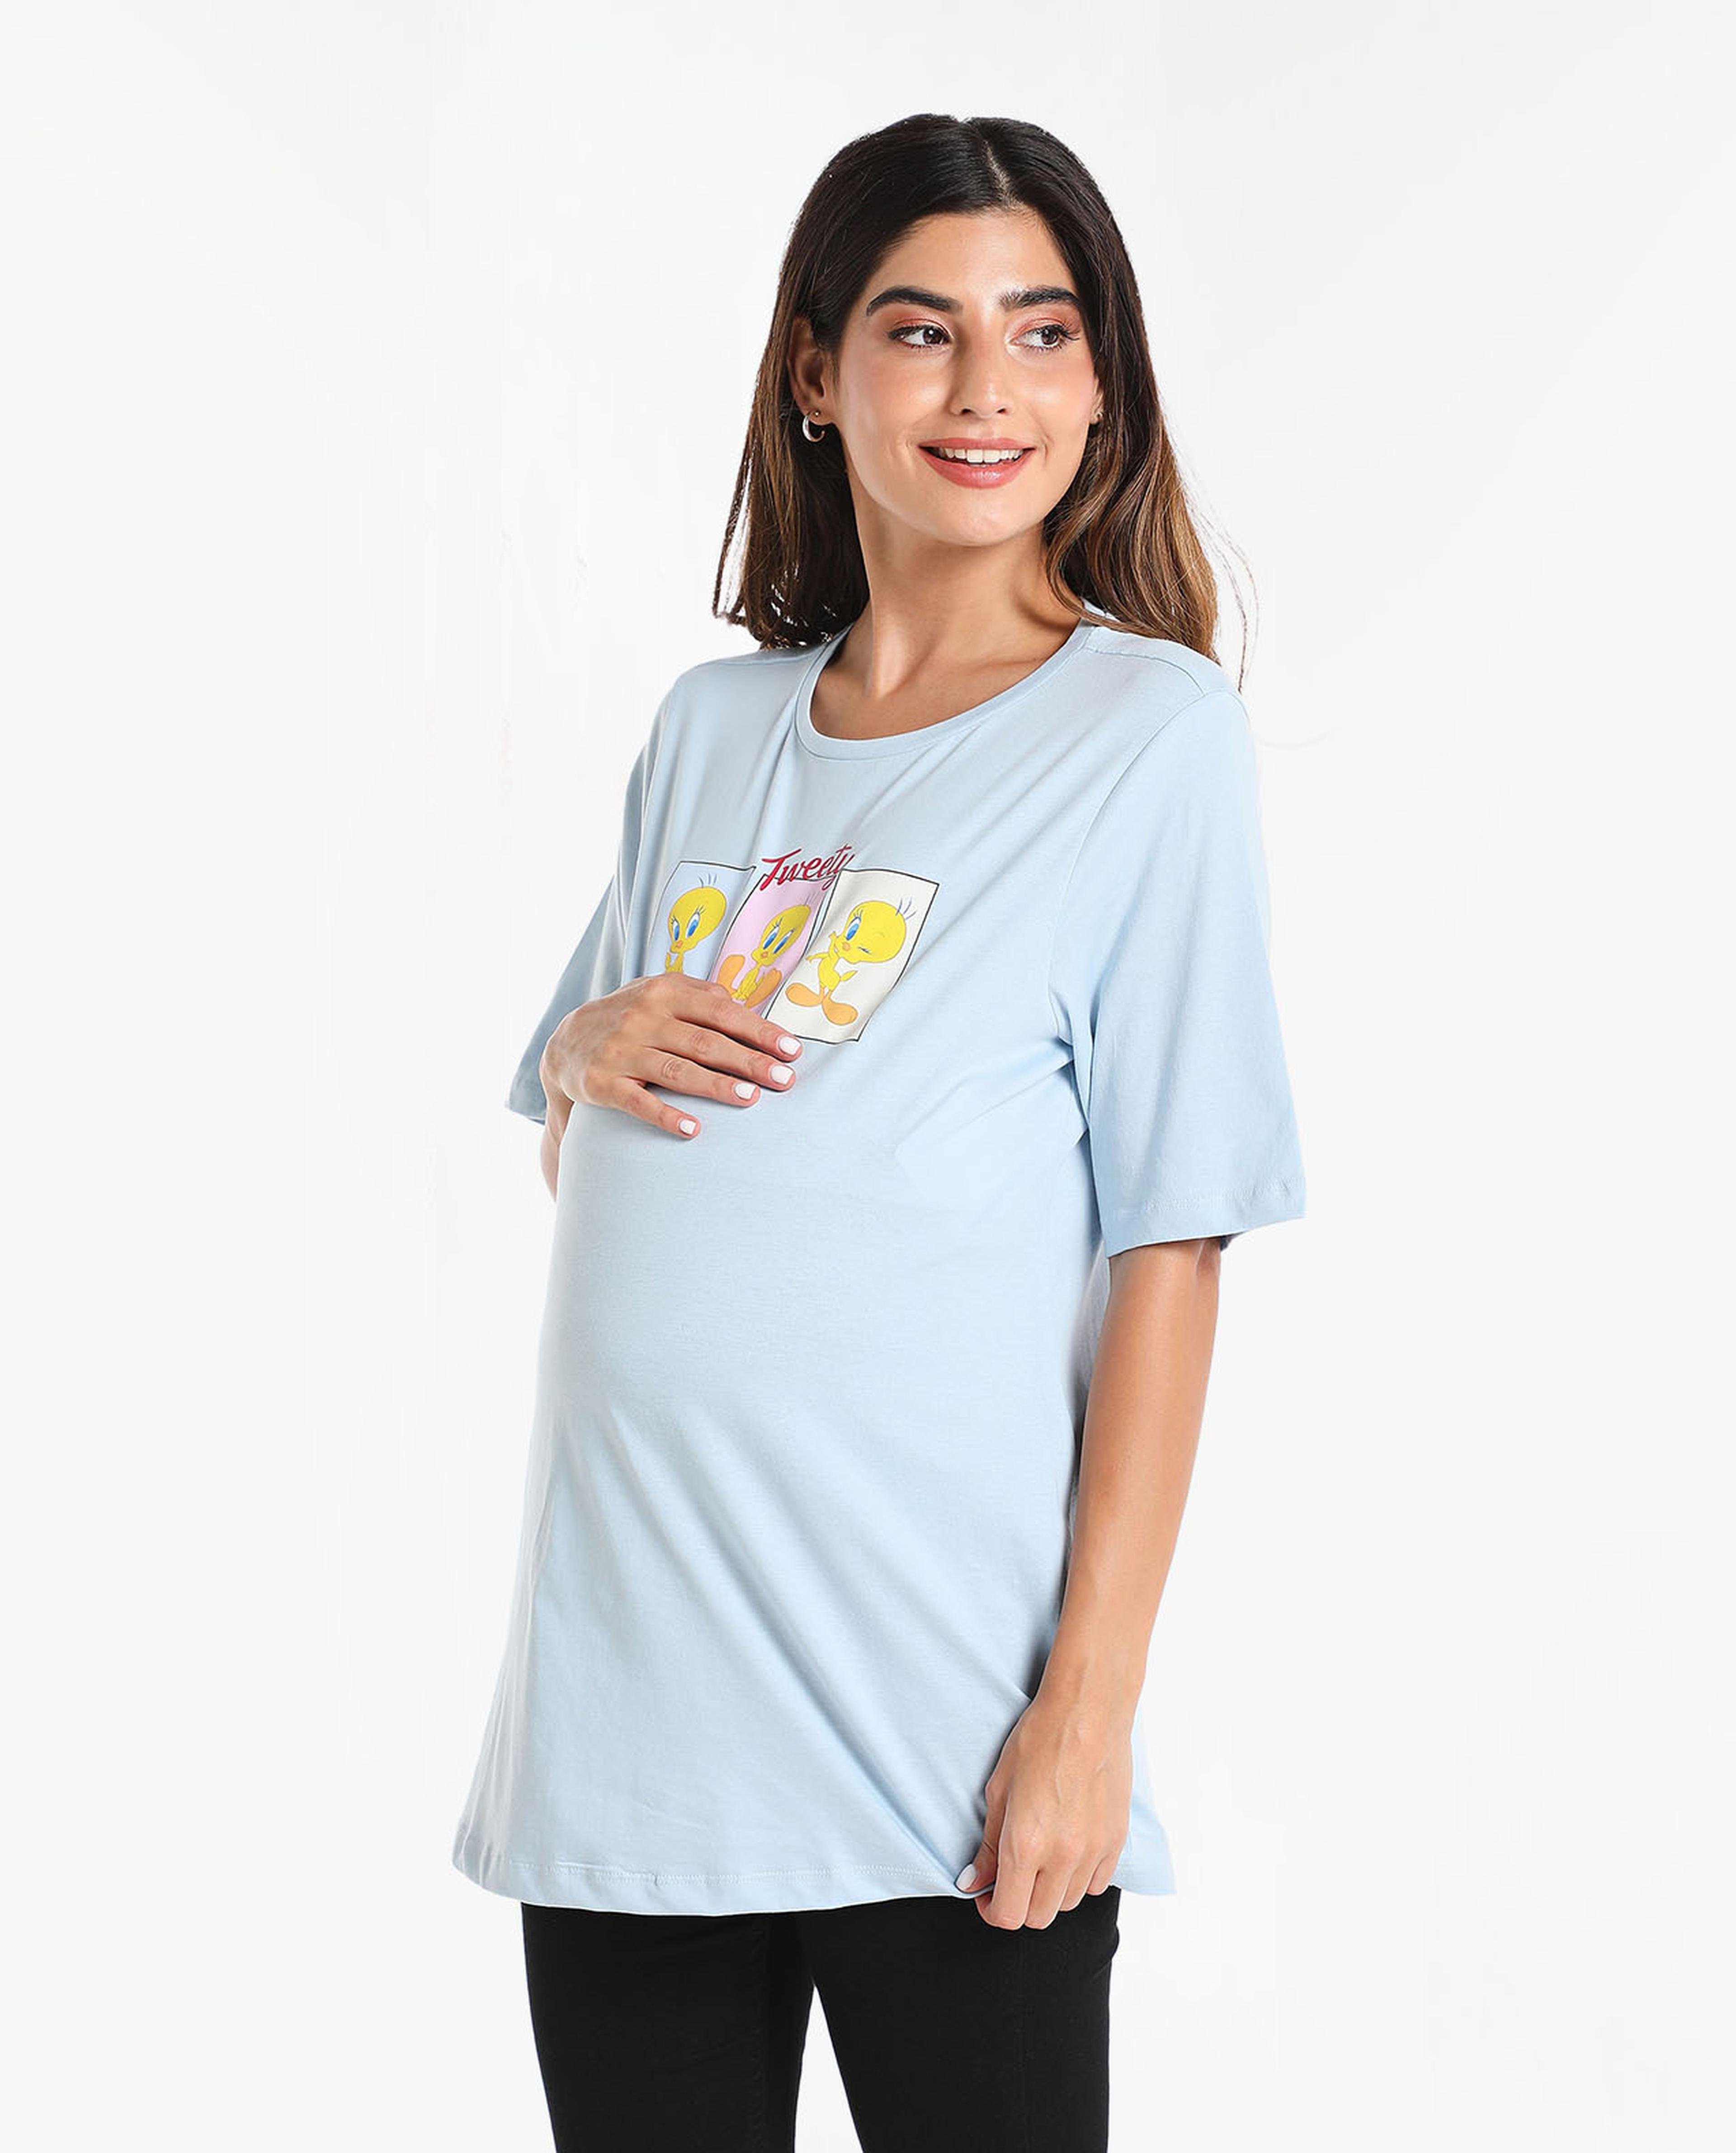 Printed Maternity Top with Round Neck and Short Sleeves